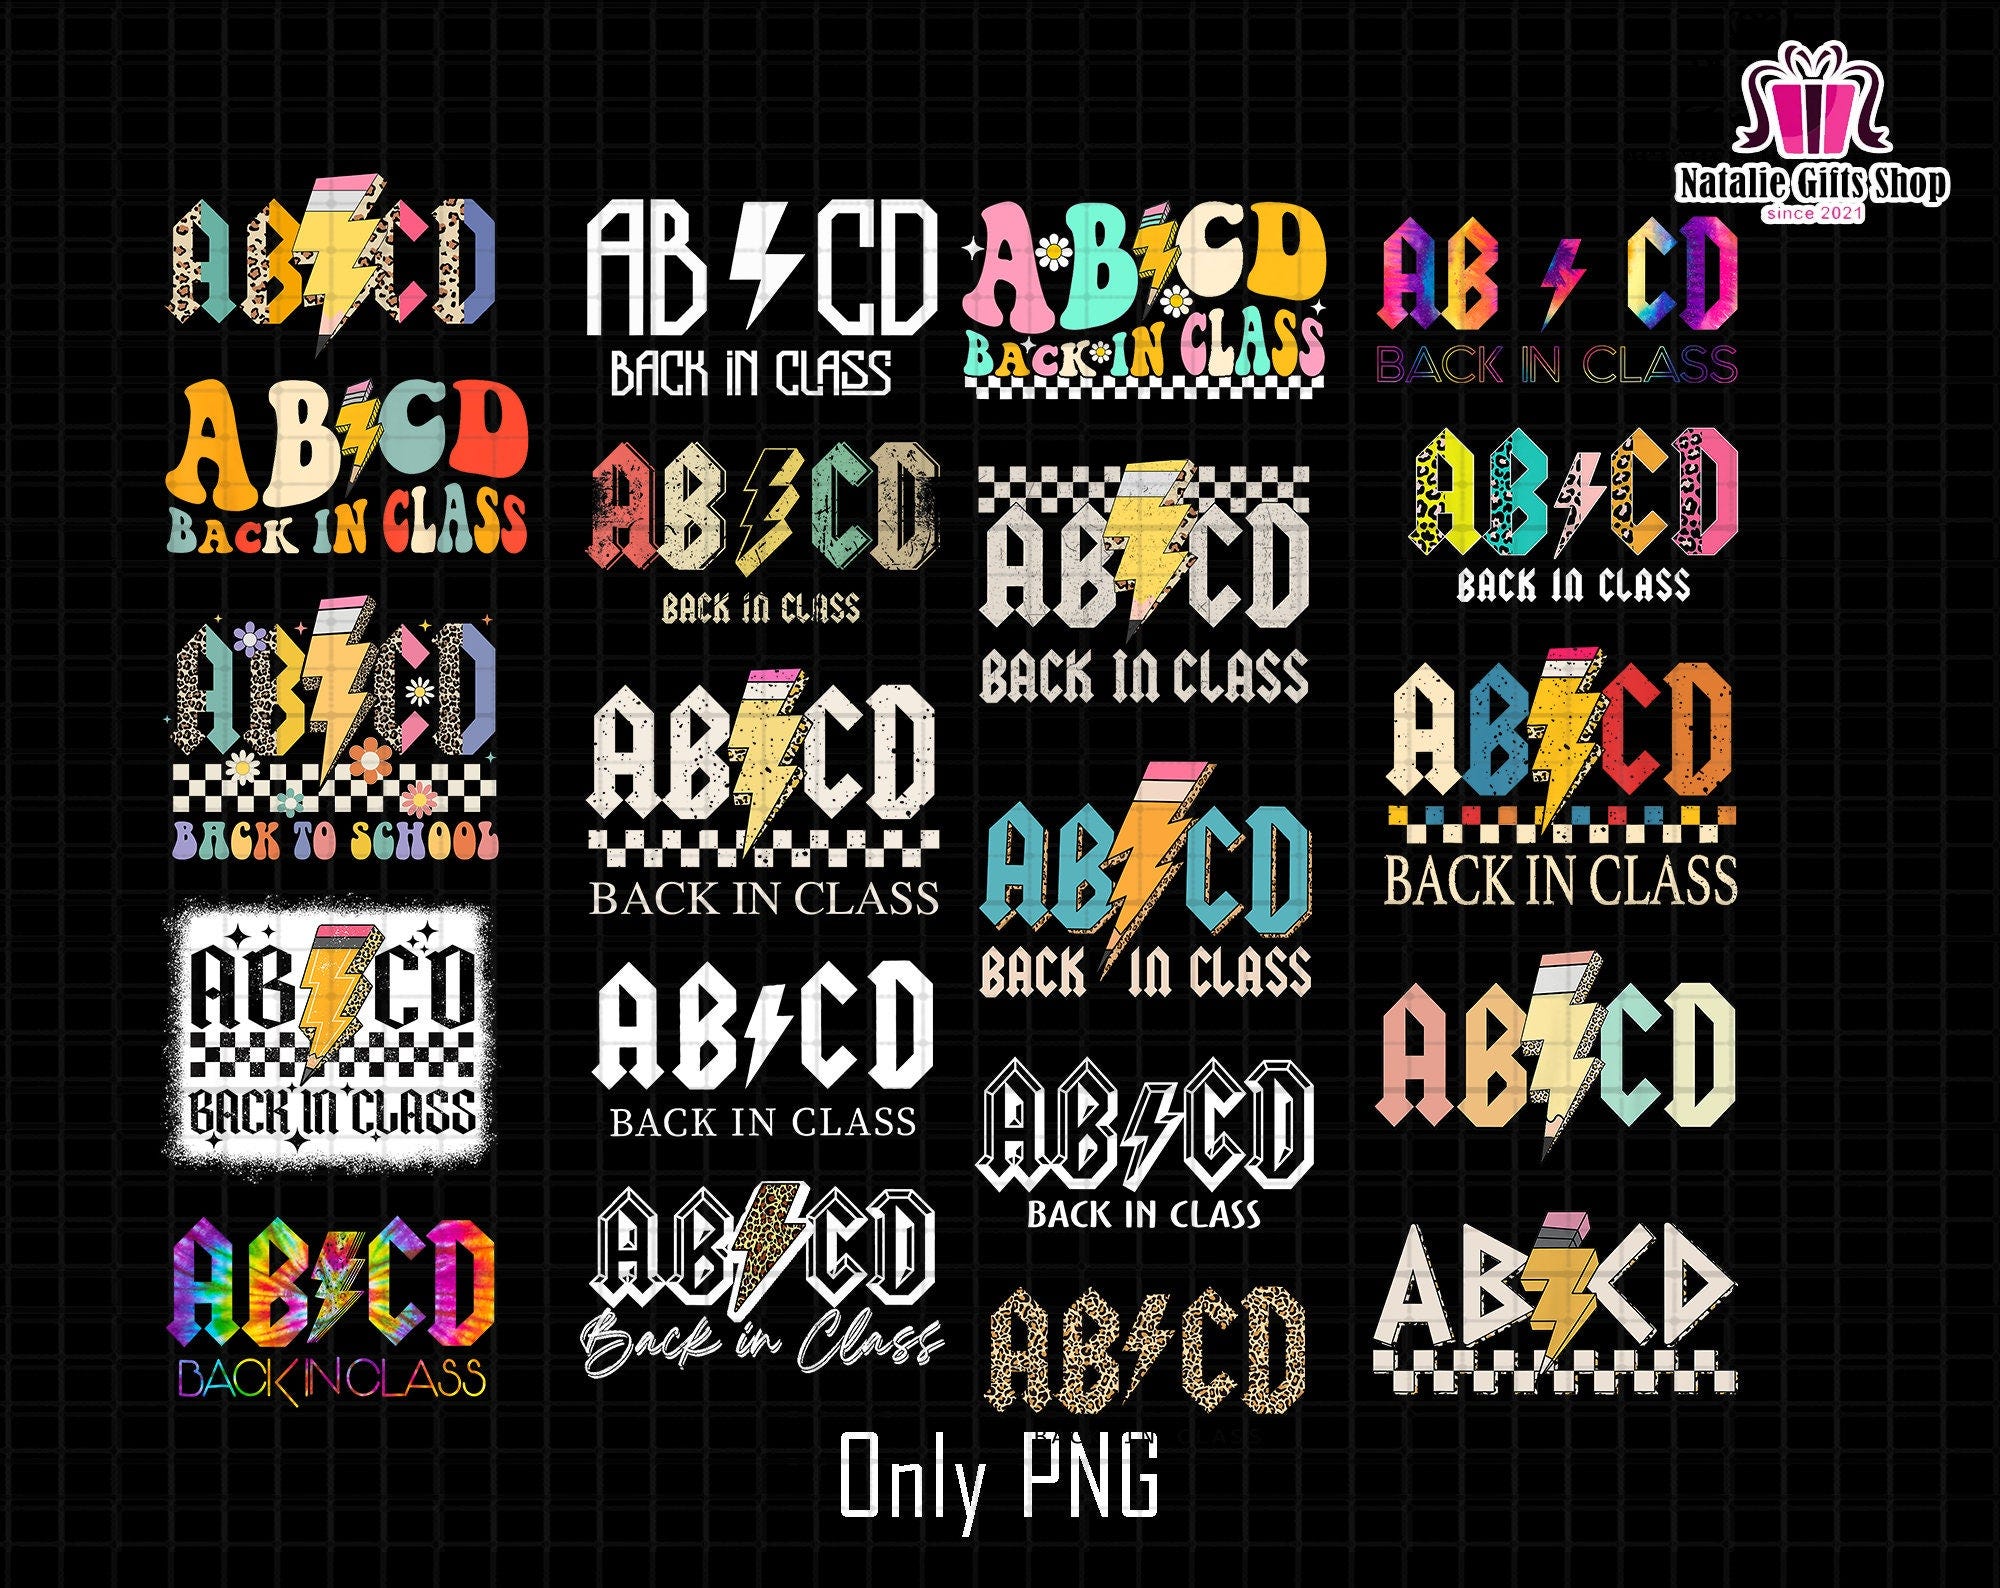 ABCD Back In Class Png Bundle, Back In Class Png, Back to School, ABCD Shirt Png, 1st Day Of School Png, Teacher Life Png,Alphabet Shirt Png